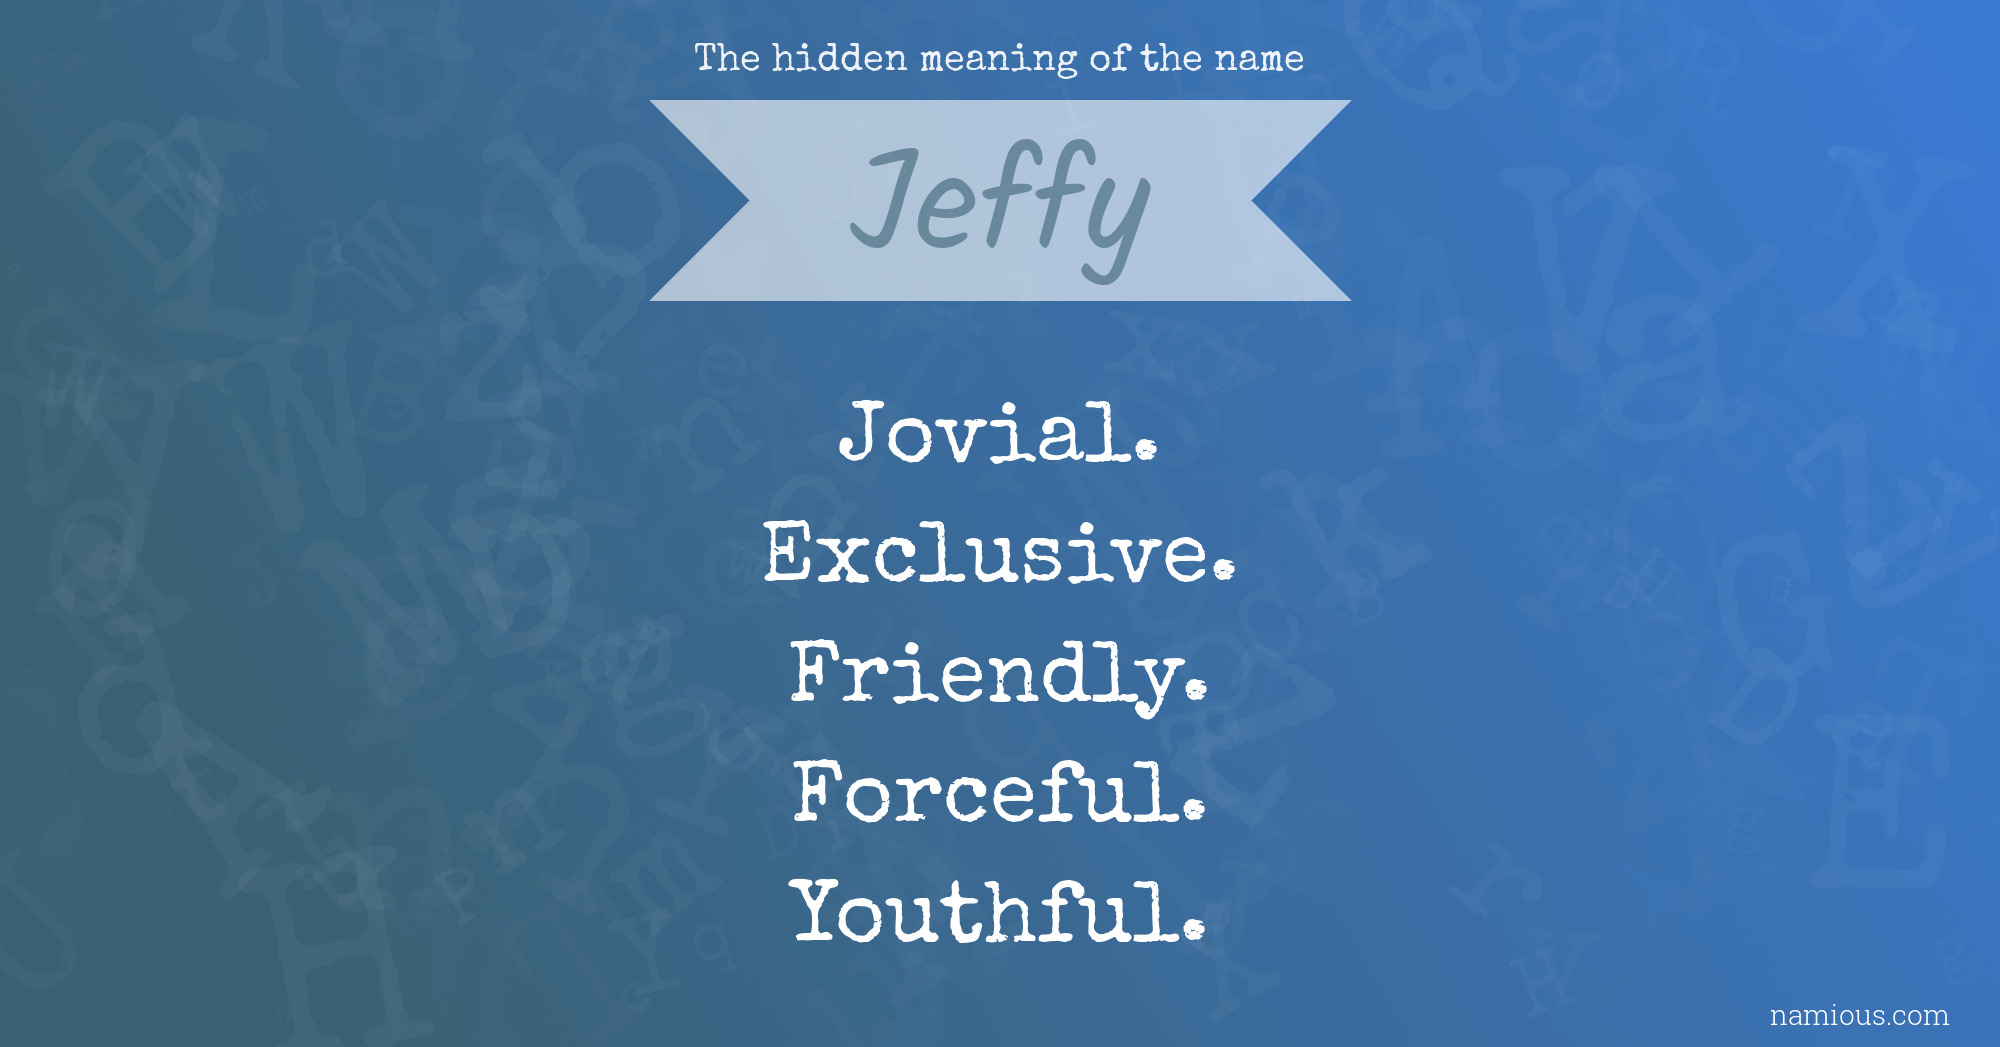 The hidden meaning of the name Jeffy